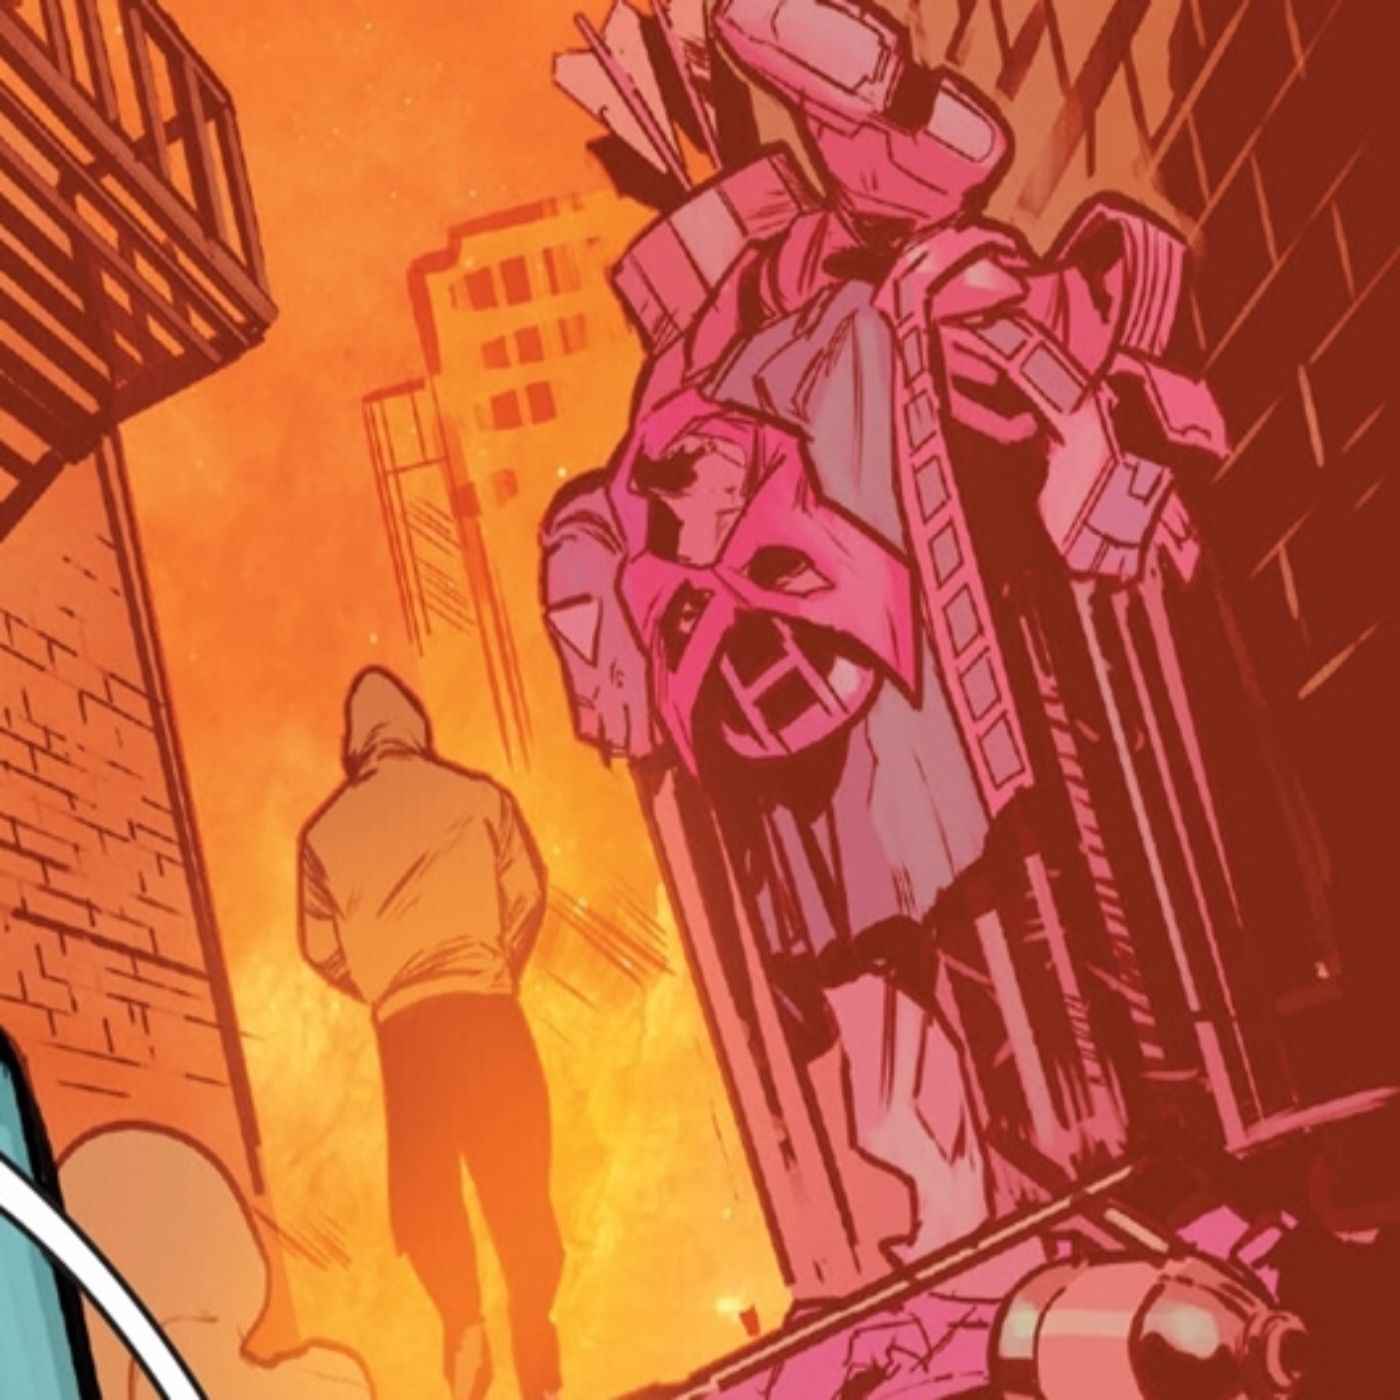 Hawkeye walking away from his costume in the new Ultimate Universe.